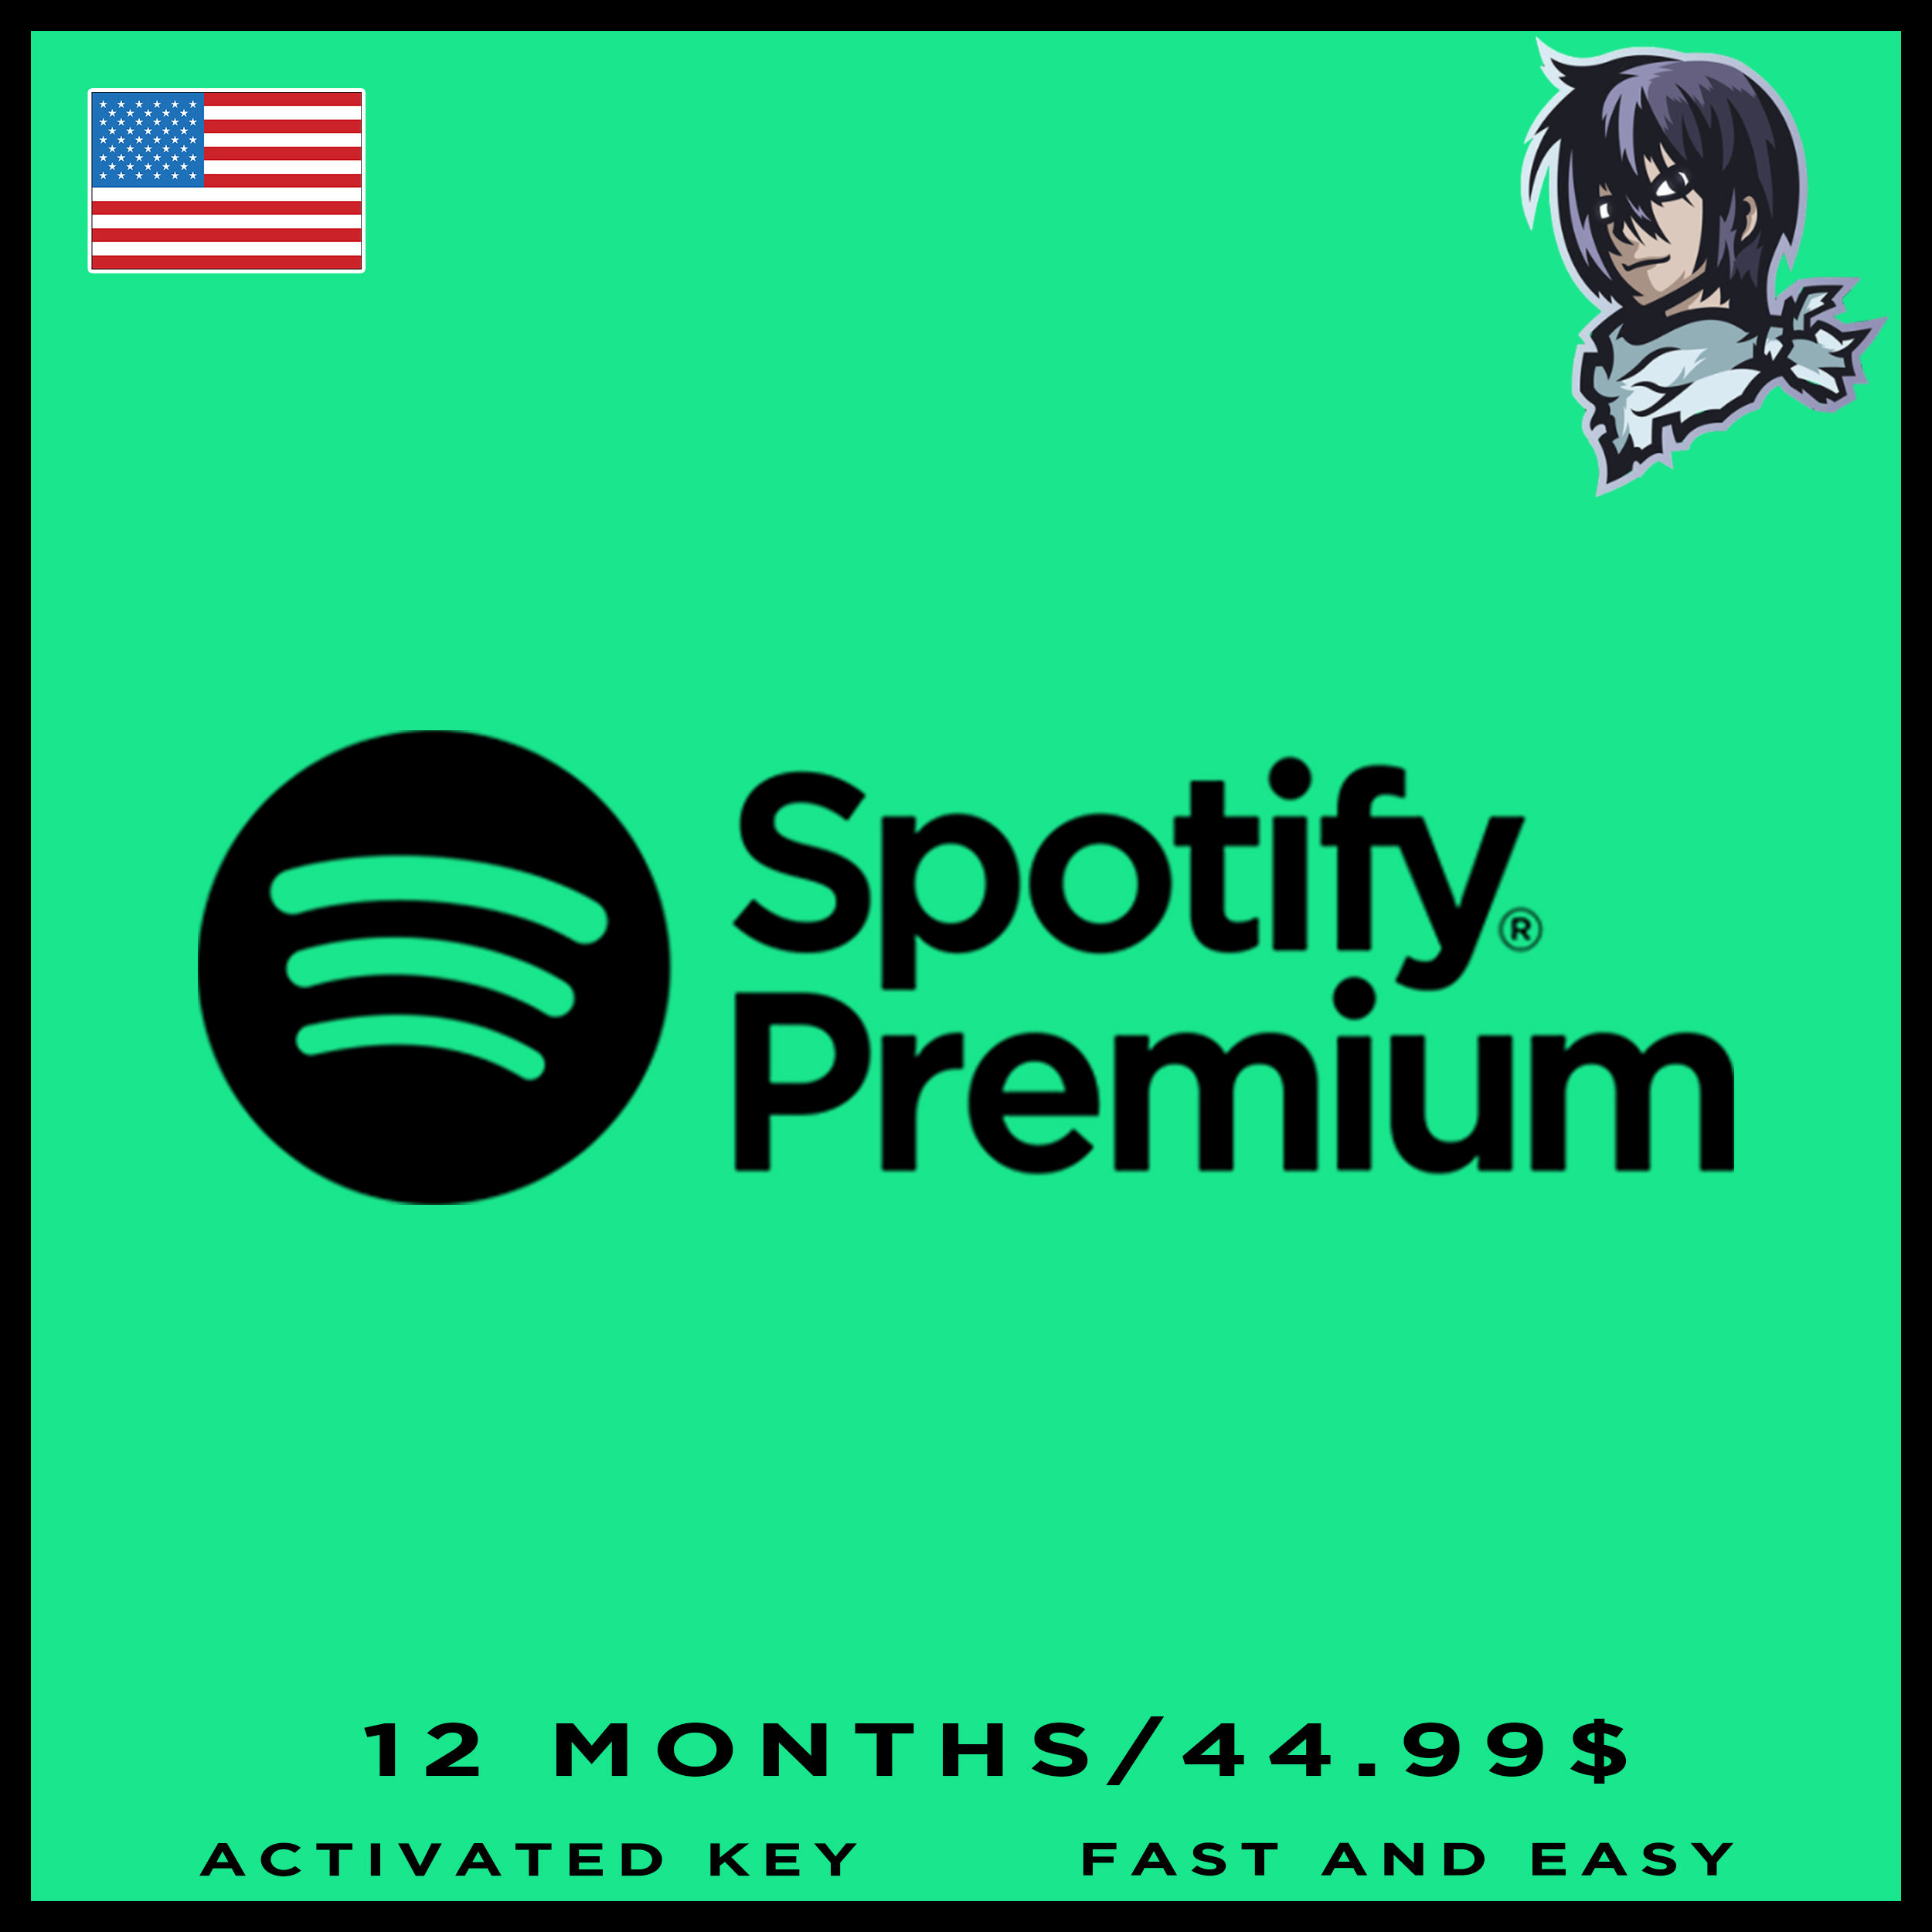 USA] SPOTIFY PREMIUM 12 MONTHS II ACTIVATION KEY II FAST AND EASY